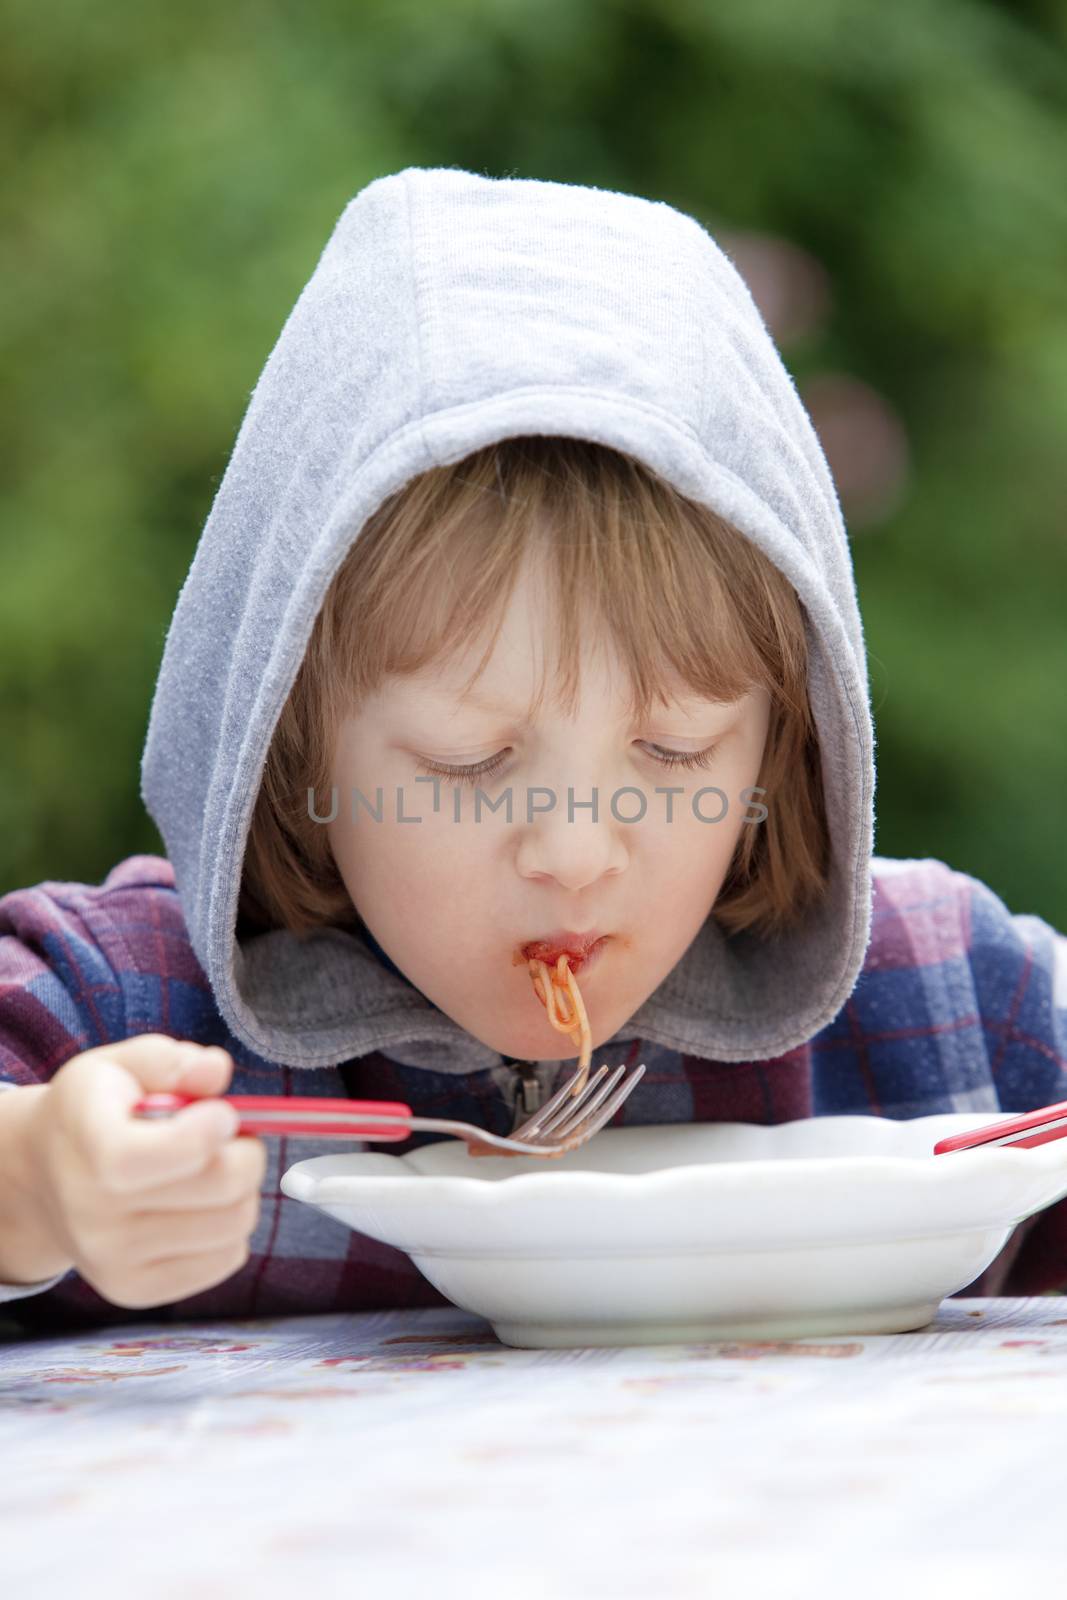 Boy with Blond Hair in Hood Eating Pasta